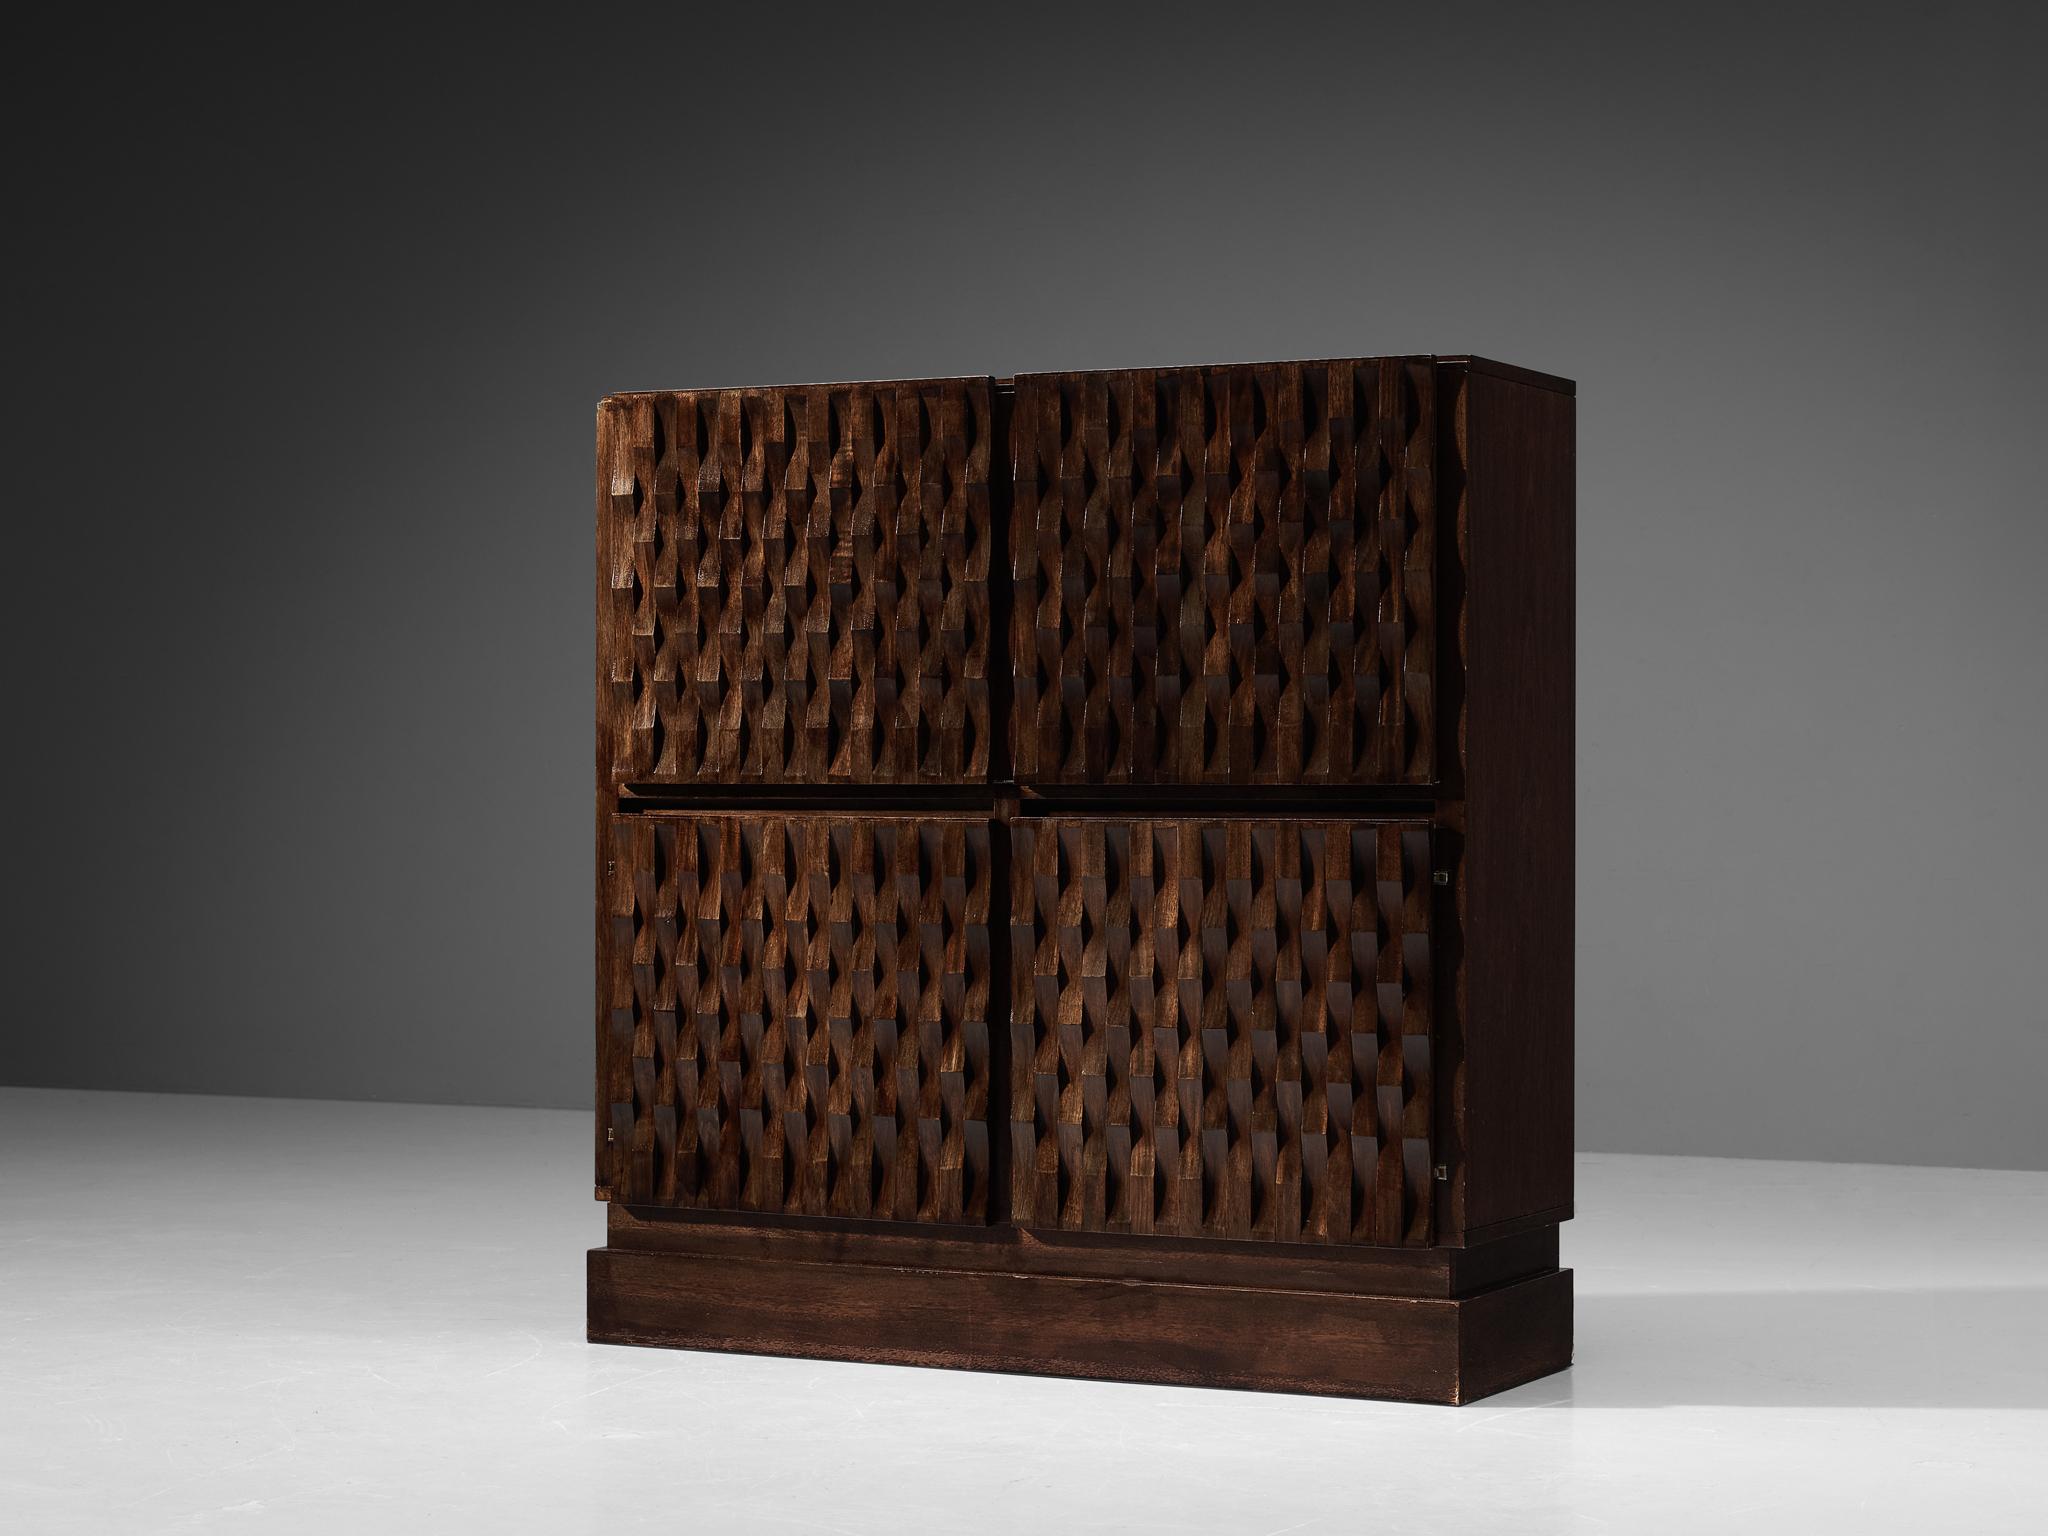 De Coene, highboard or drybar, oak, laminated wood, Belgium, 1970s.

This very evocative drybar by De Coene features a clear rhythm and flow established by means of a well thought through lay out that is very well-balanced. The carved door panels